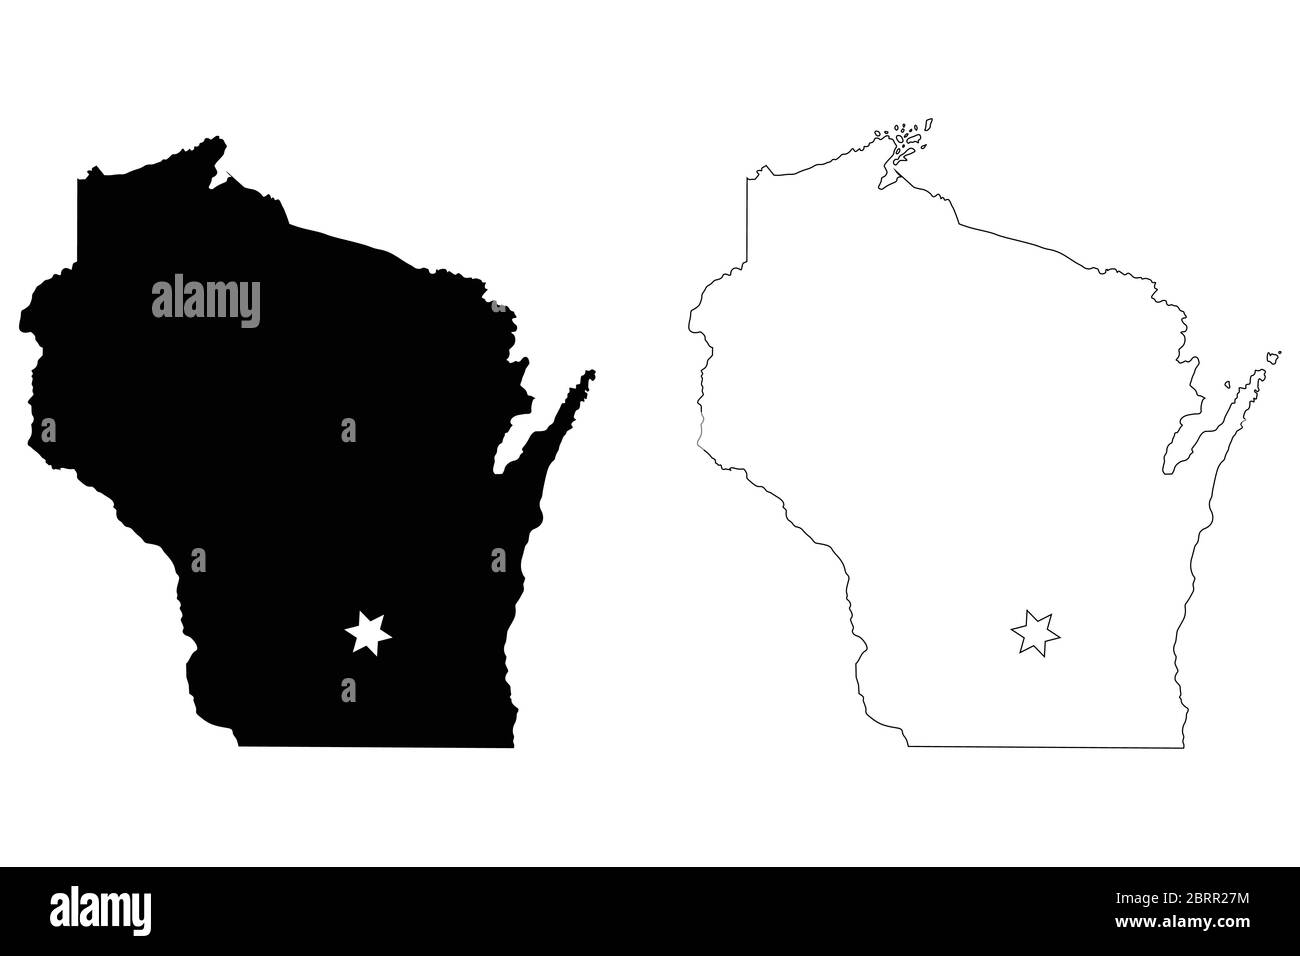 Wisconsin WI state Map USA with Capital City Star at Madison. Black silhouette and outline isolated maps on a white background. EPS Vector Stock Vector